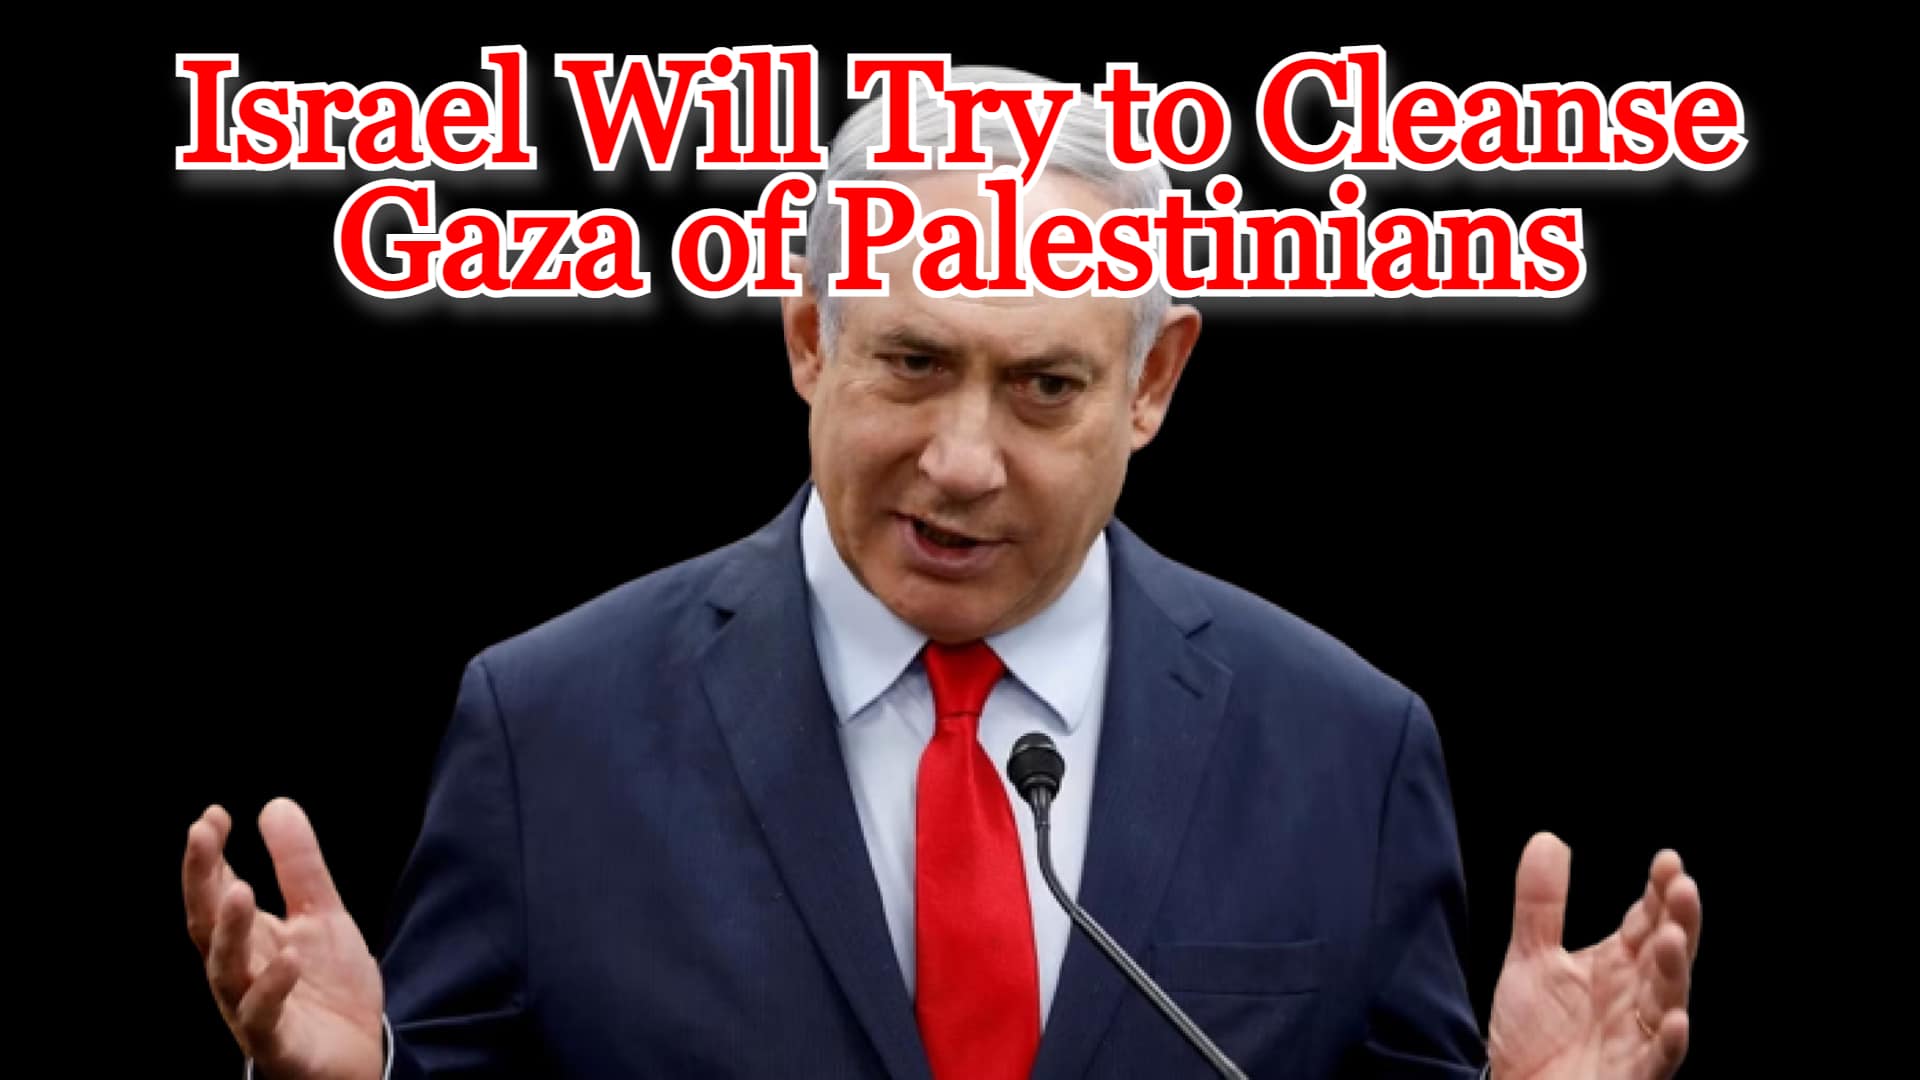 COI #500: Israel Will Try to Cleanse Gaza of Palestinians